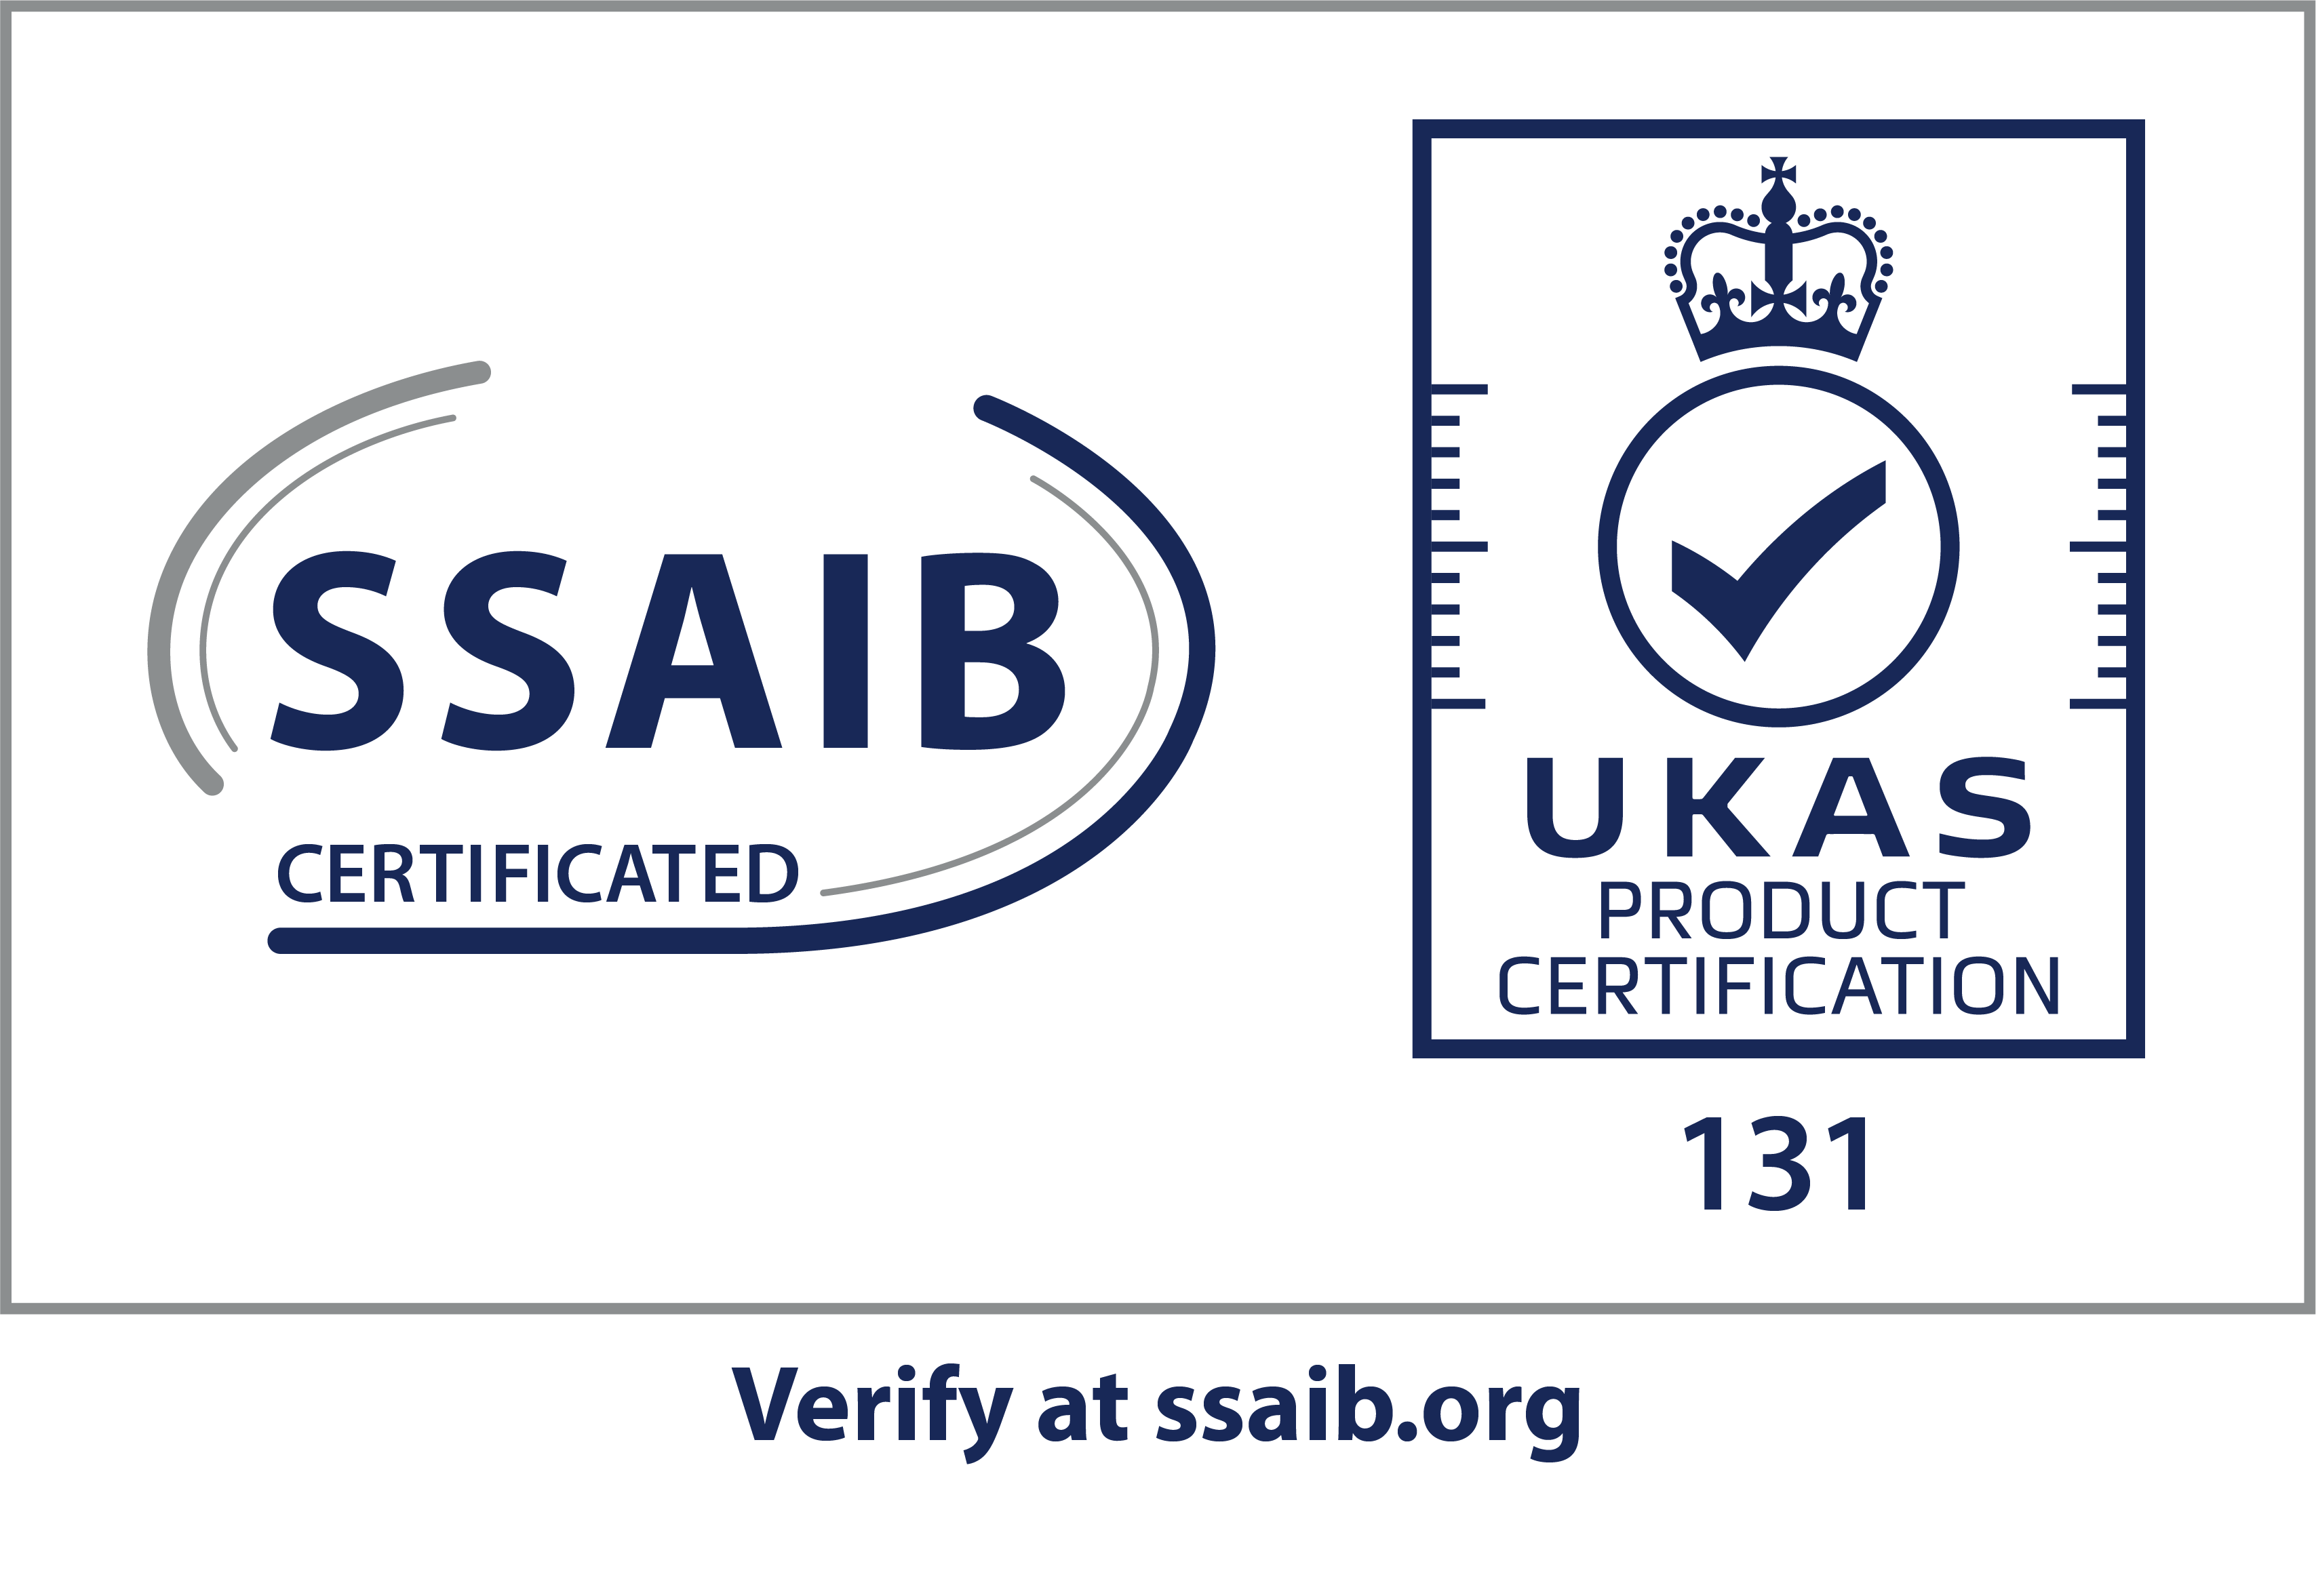 SSIAB Certficated